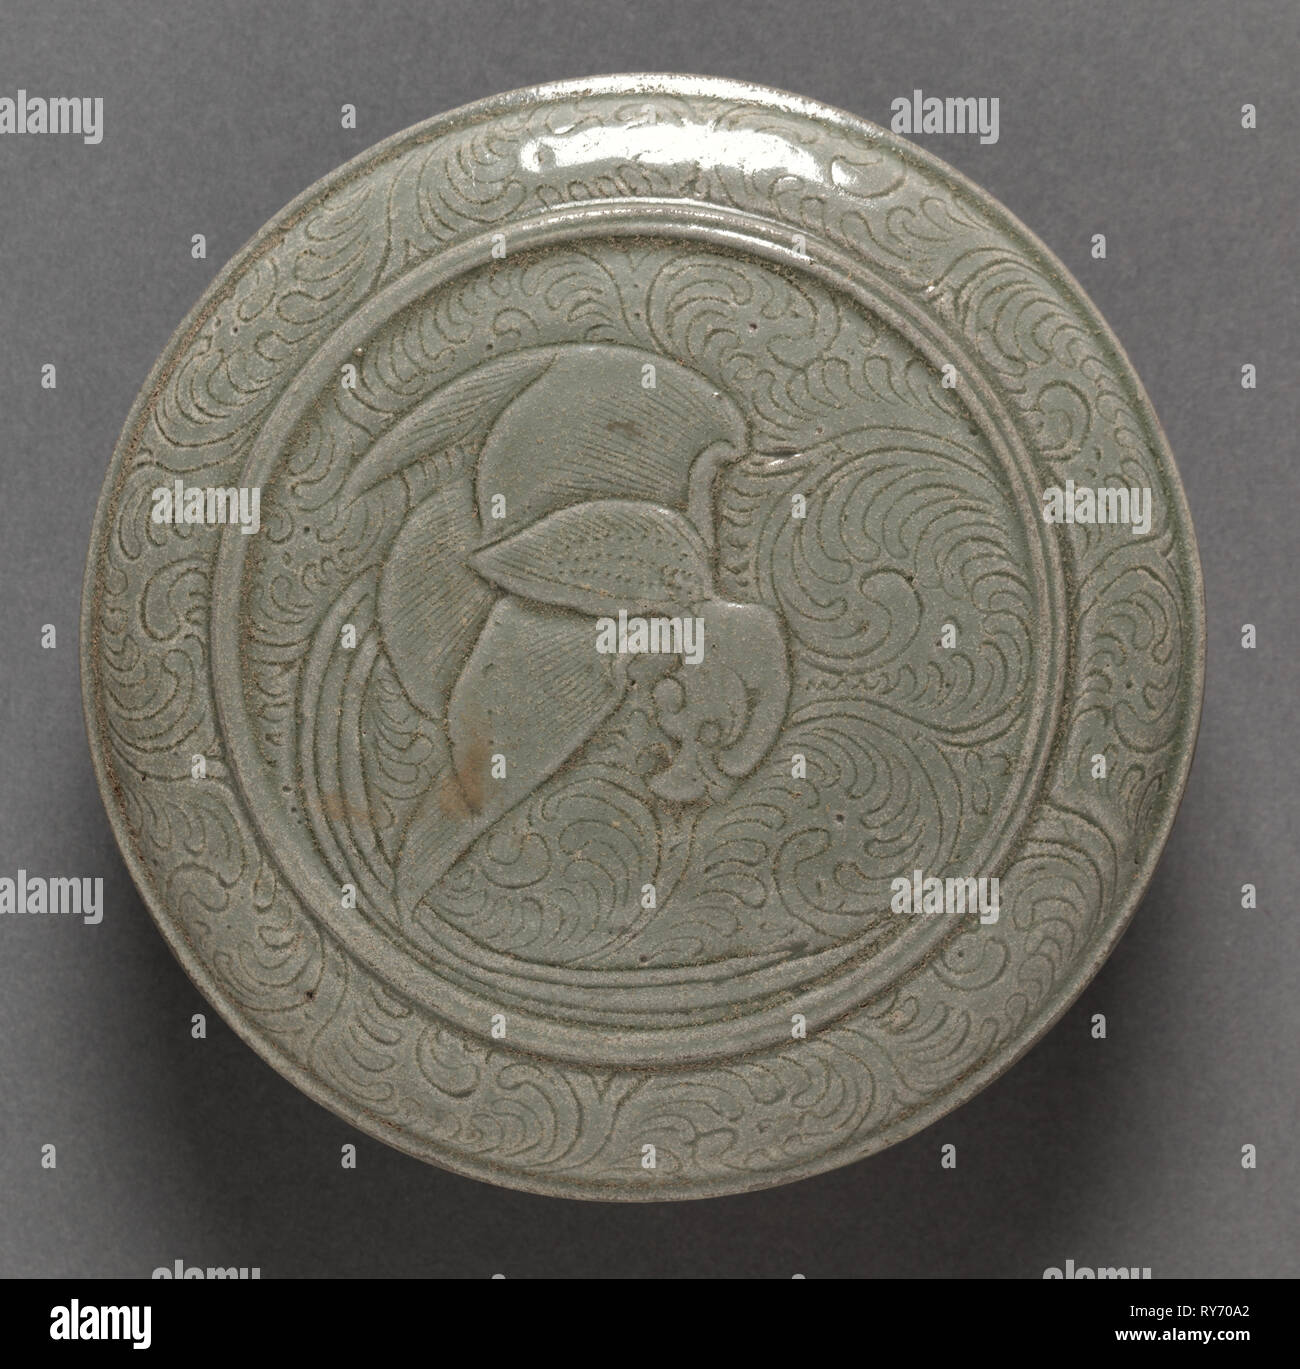 Covered Box: Yue Ware (lid), 907-960. China, Shang-lin-hu kilns, Yu-yao District, Zhejiang province, Five dynasties (907-960). Glazed stoneware with incised decoration; diameter: 13 cm (5 1/8 in Stock Photo